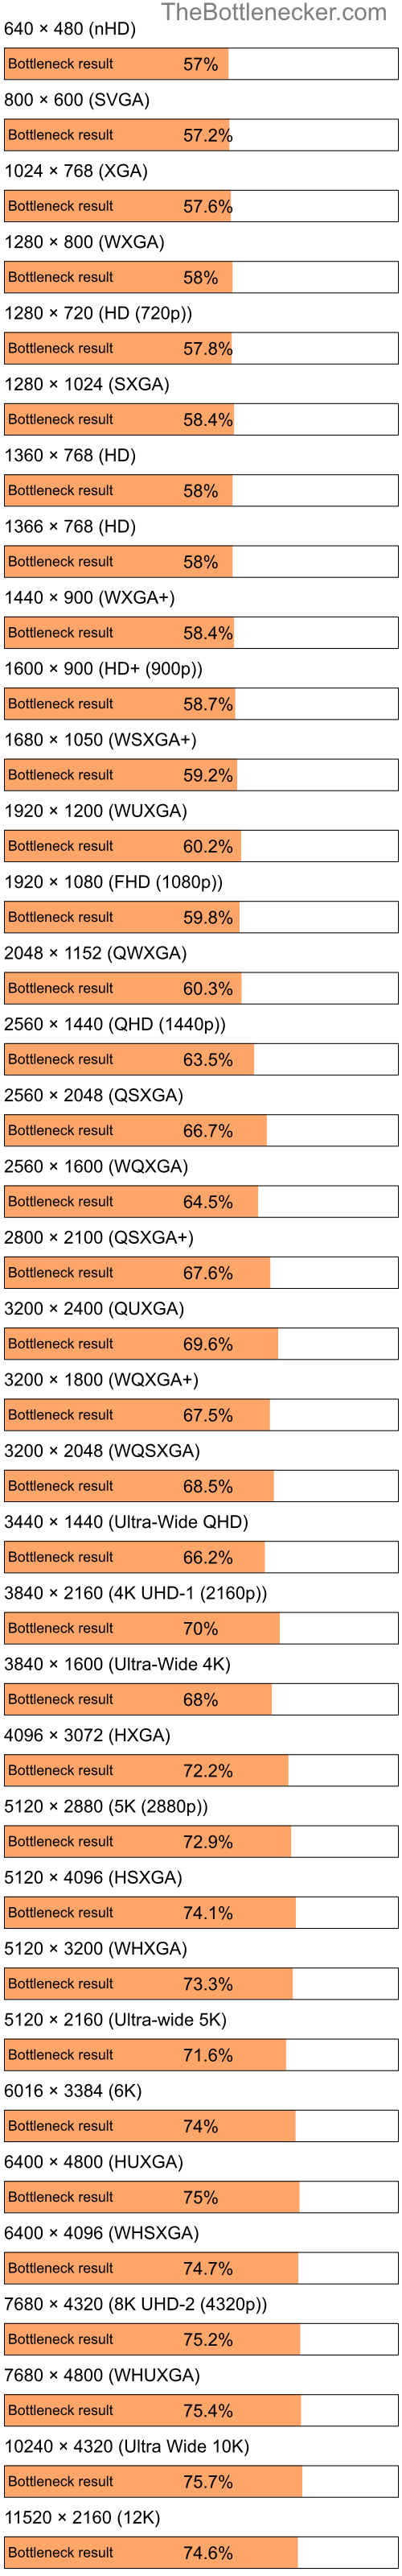 Bottleneck results by resolution for Intel Atom N270 and NVIDIA Quadro FX 370 in Processor Intense Tasks